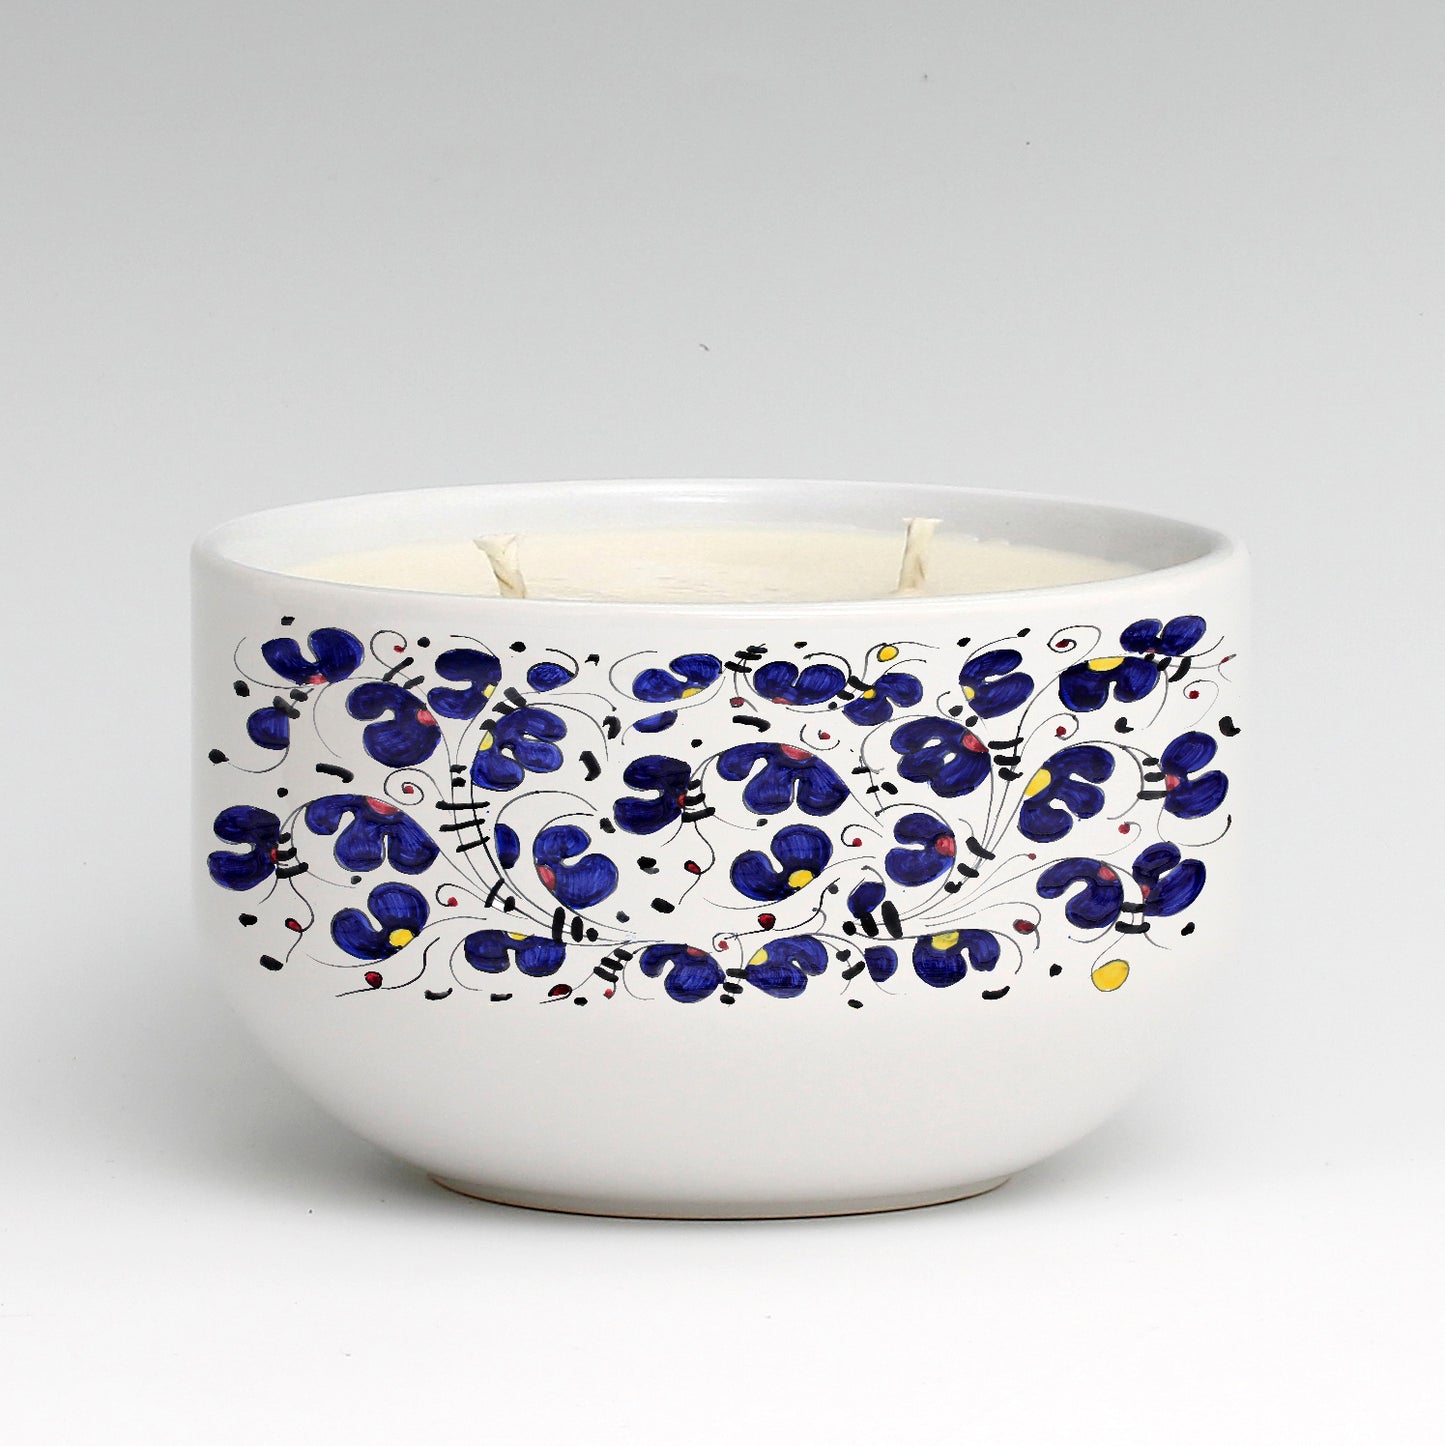 SUBLIMART: Two Wicks Soy Wax Candle in a Porcelain Bowl - Deruta Style (Design #DER07)